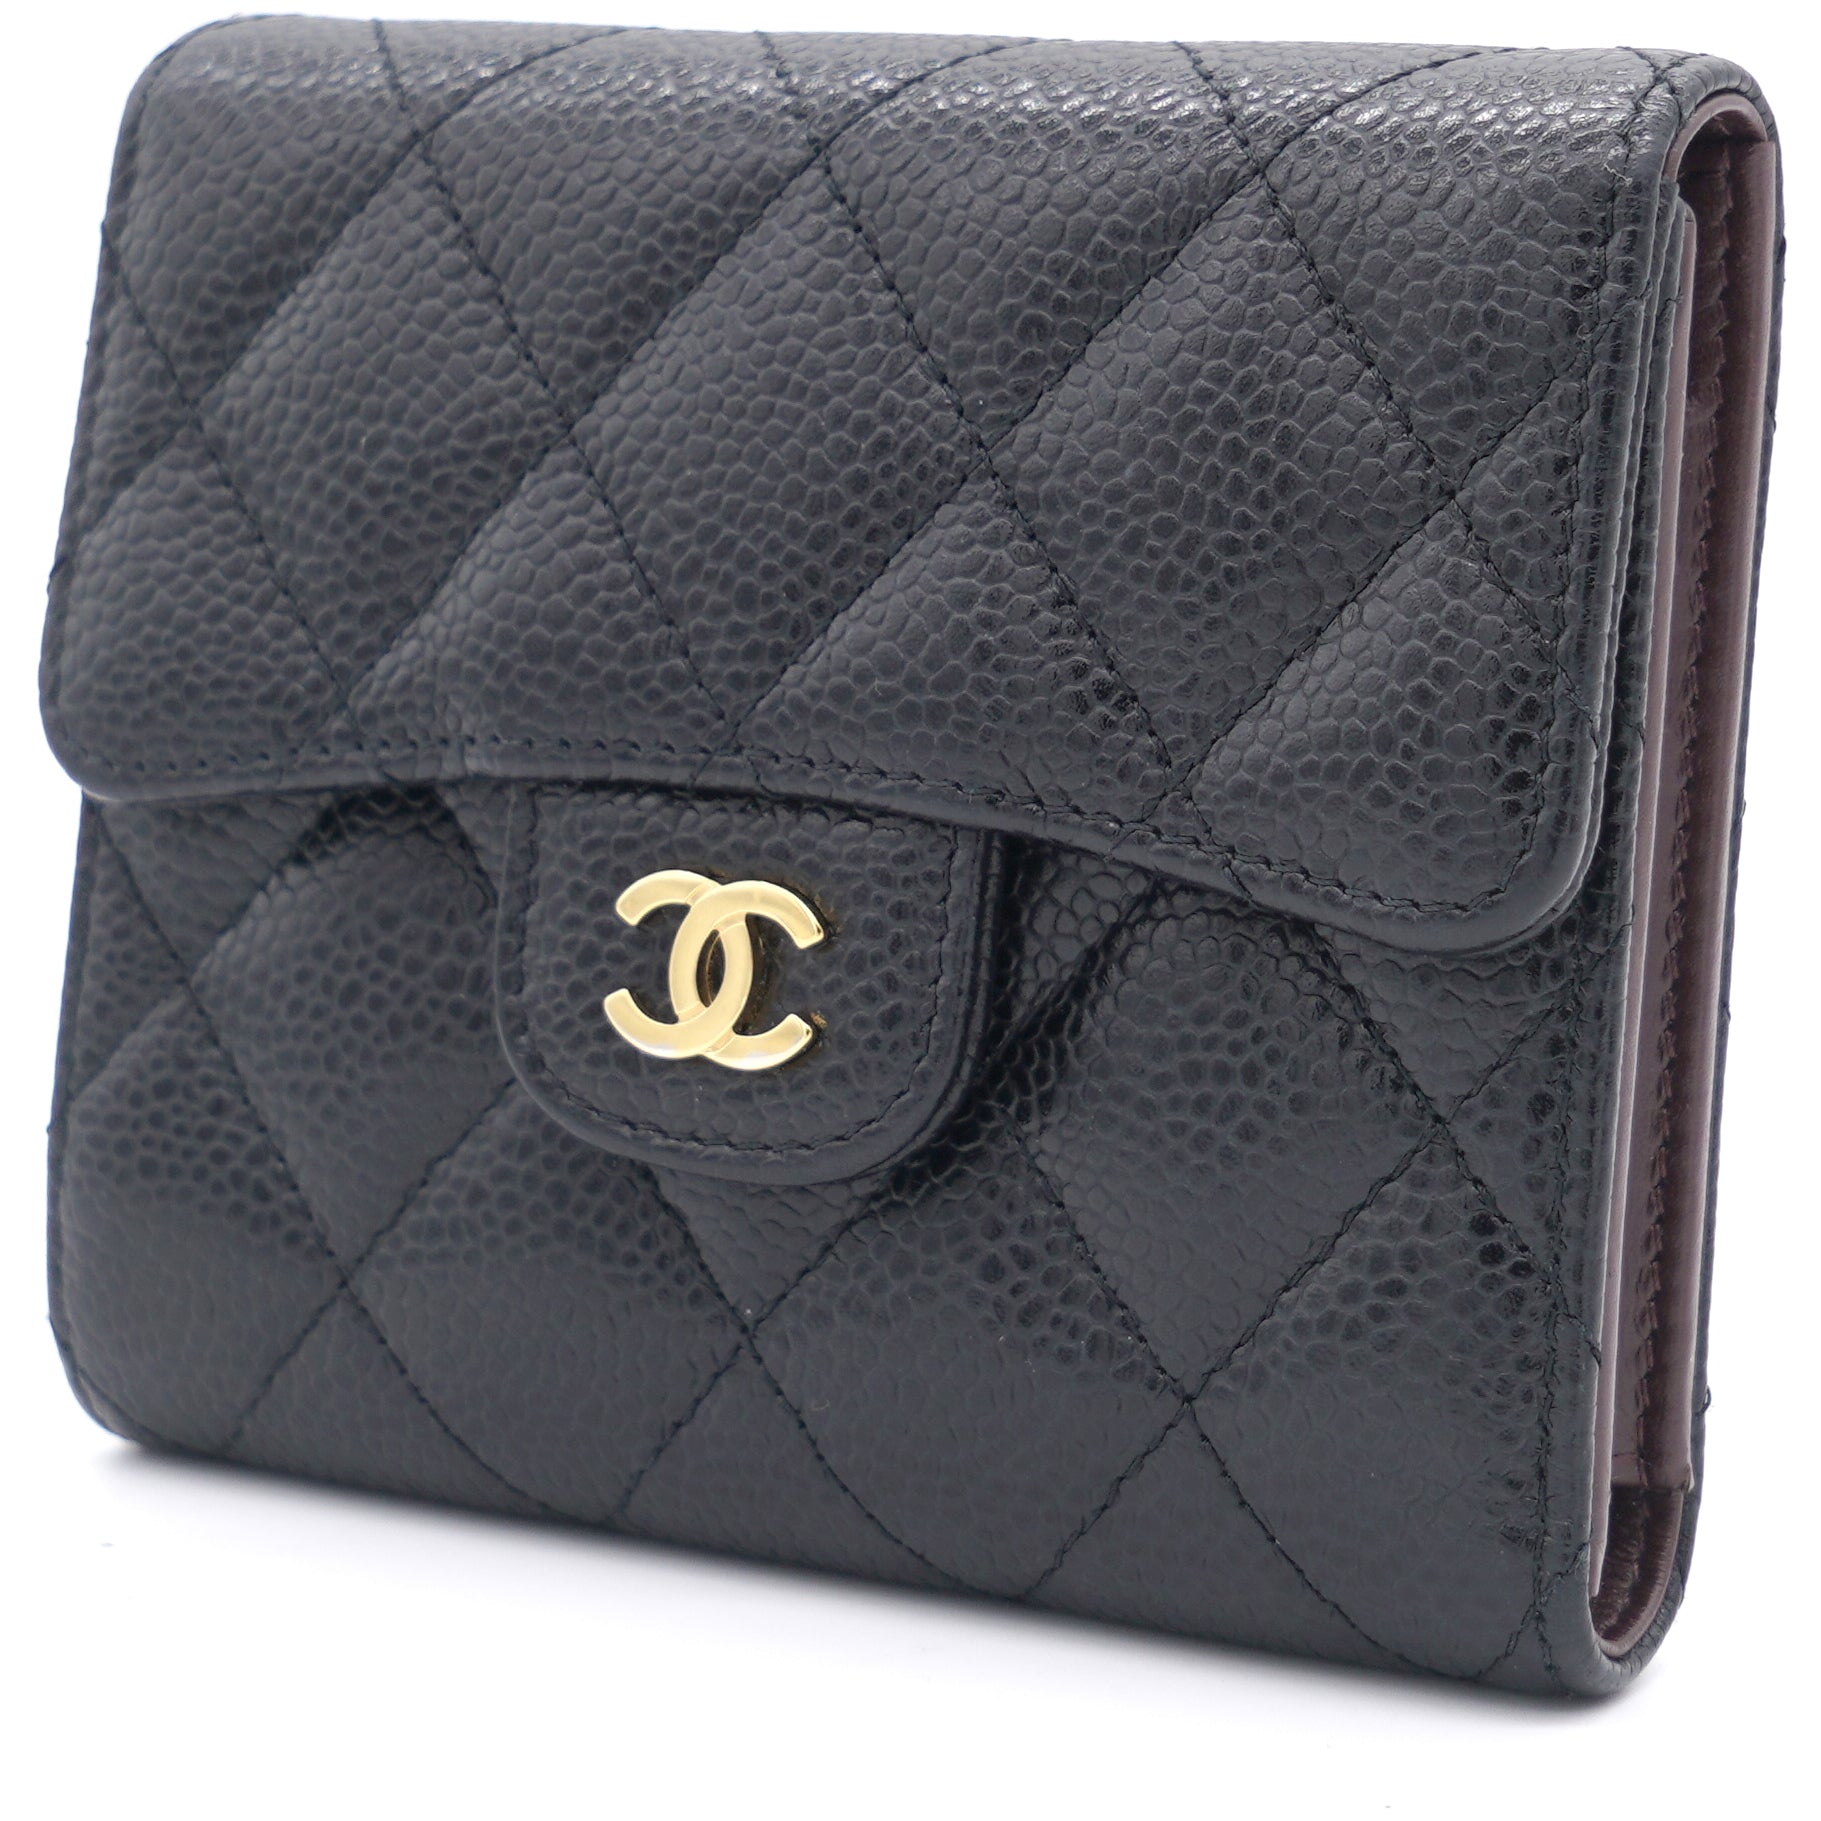 Caviar Quilted Small Compact Wallet Black